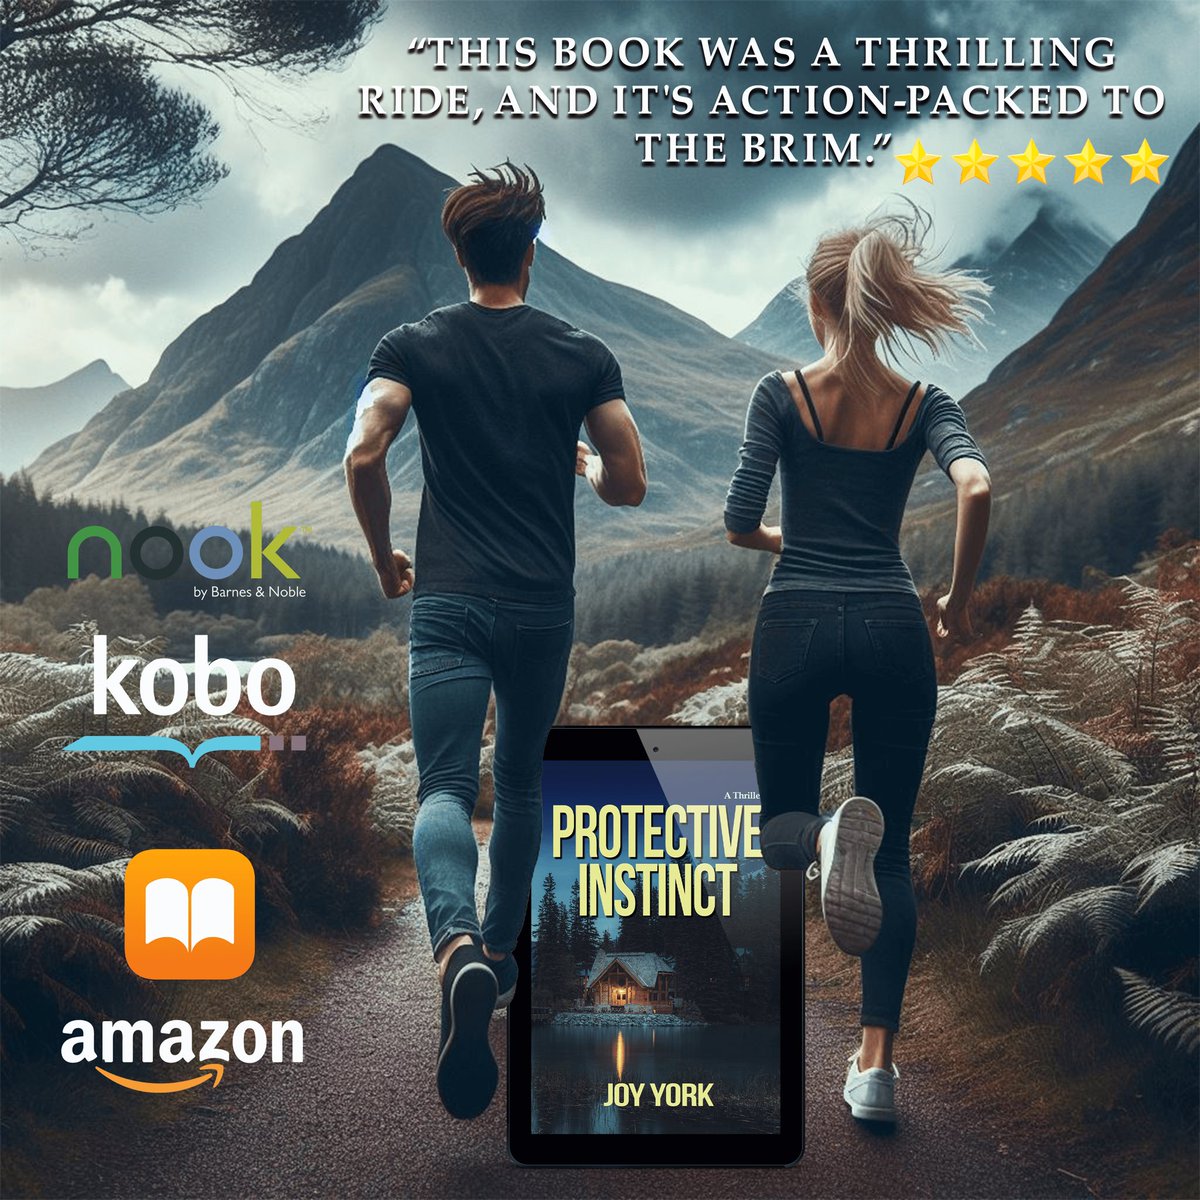 A self-absorbed bestselling author. A good-natured, southern kindergarten teacher. On the run from the mob. What could go wrong? And who saves who? #thriller #actionadventure #mystery amazon.com/Protective-Ins…